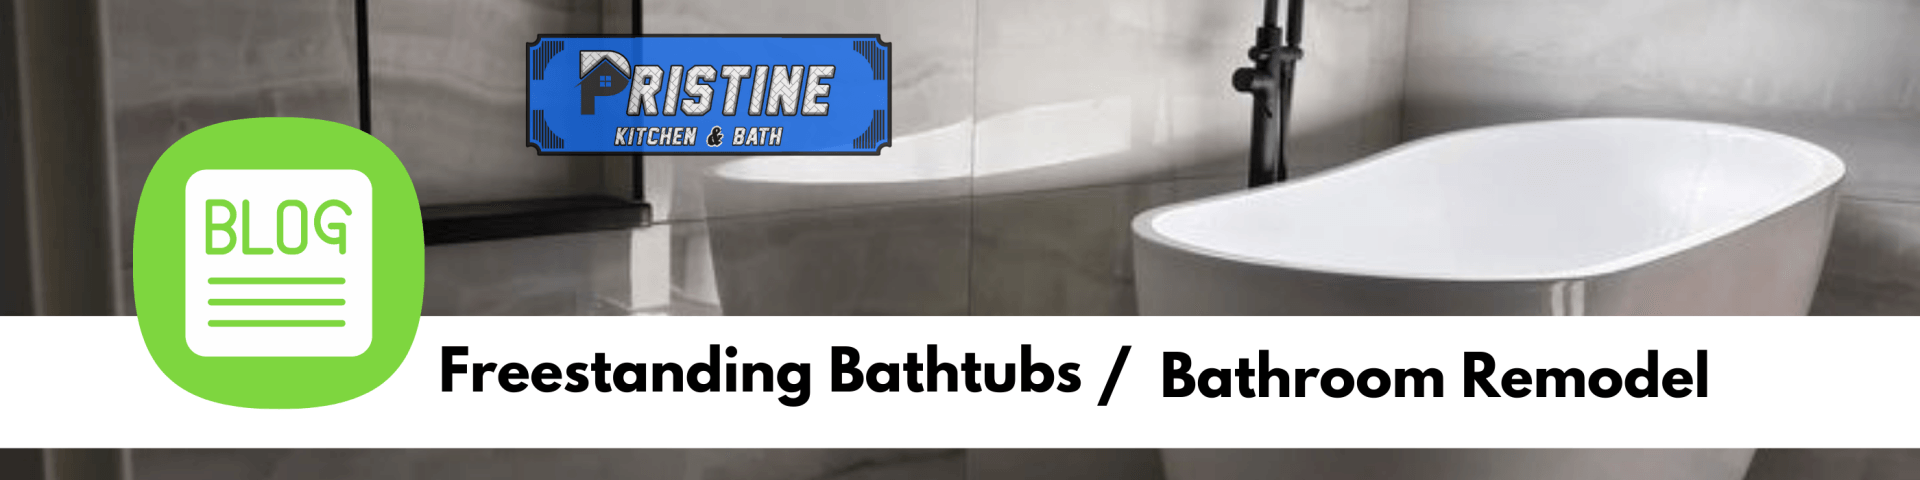 Freestanding Bathtubs as part of your next Bathroom Remodel